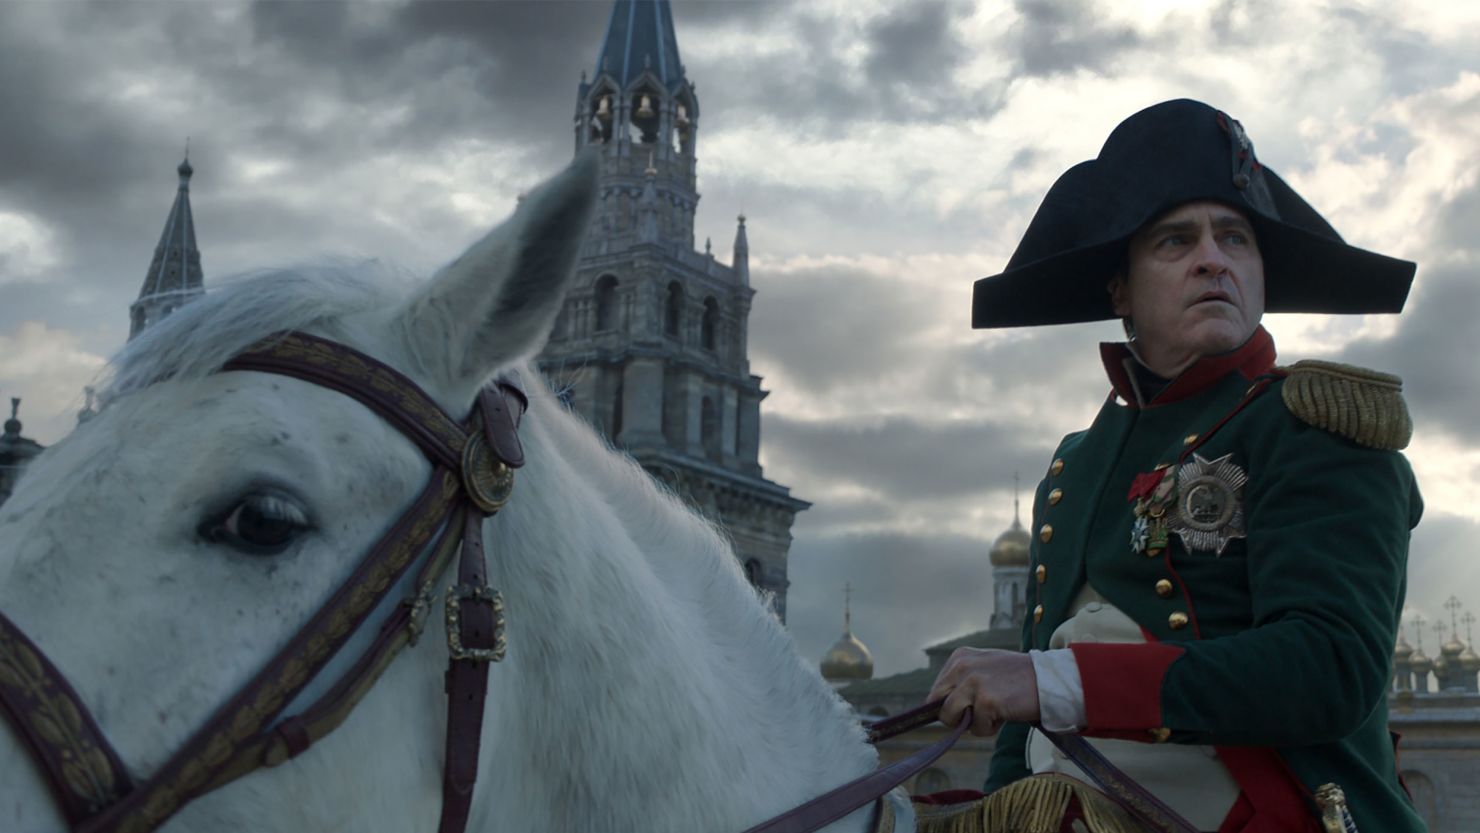 Napoleon' movie too 'anti-French' for some in France